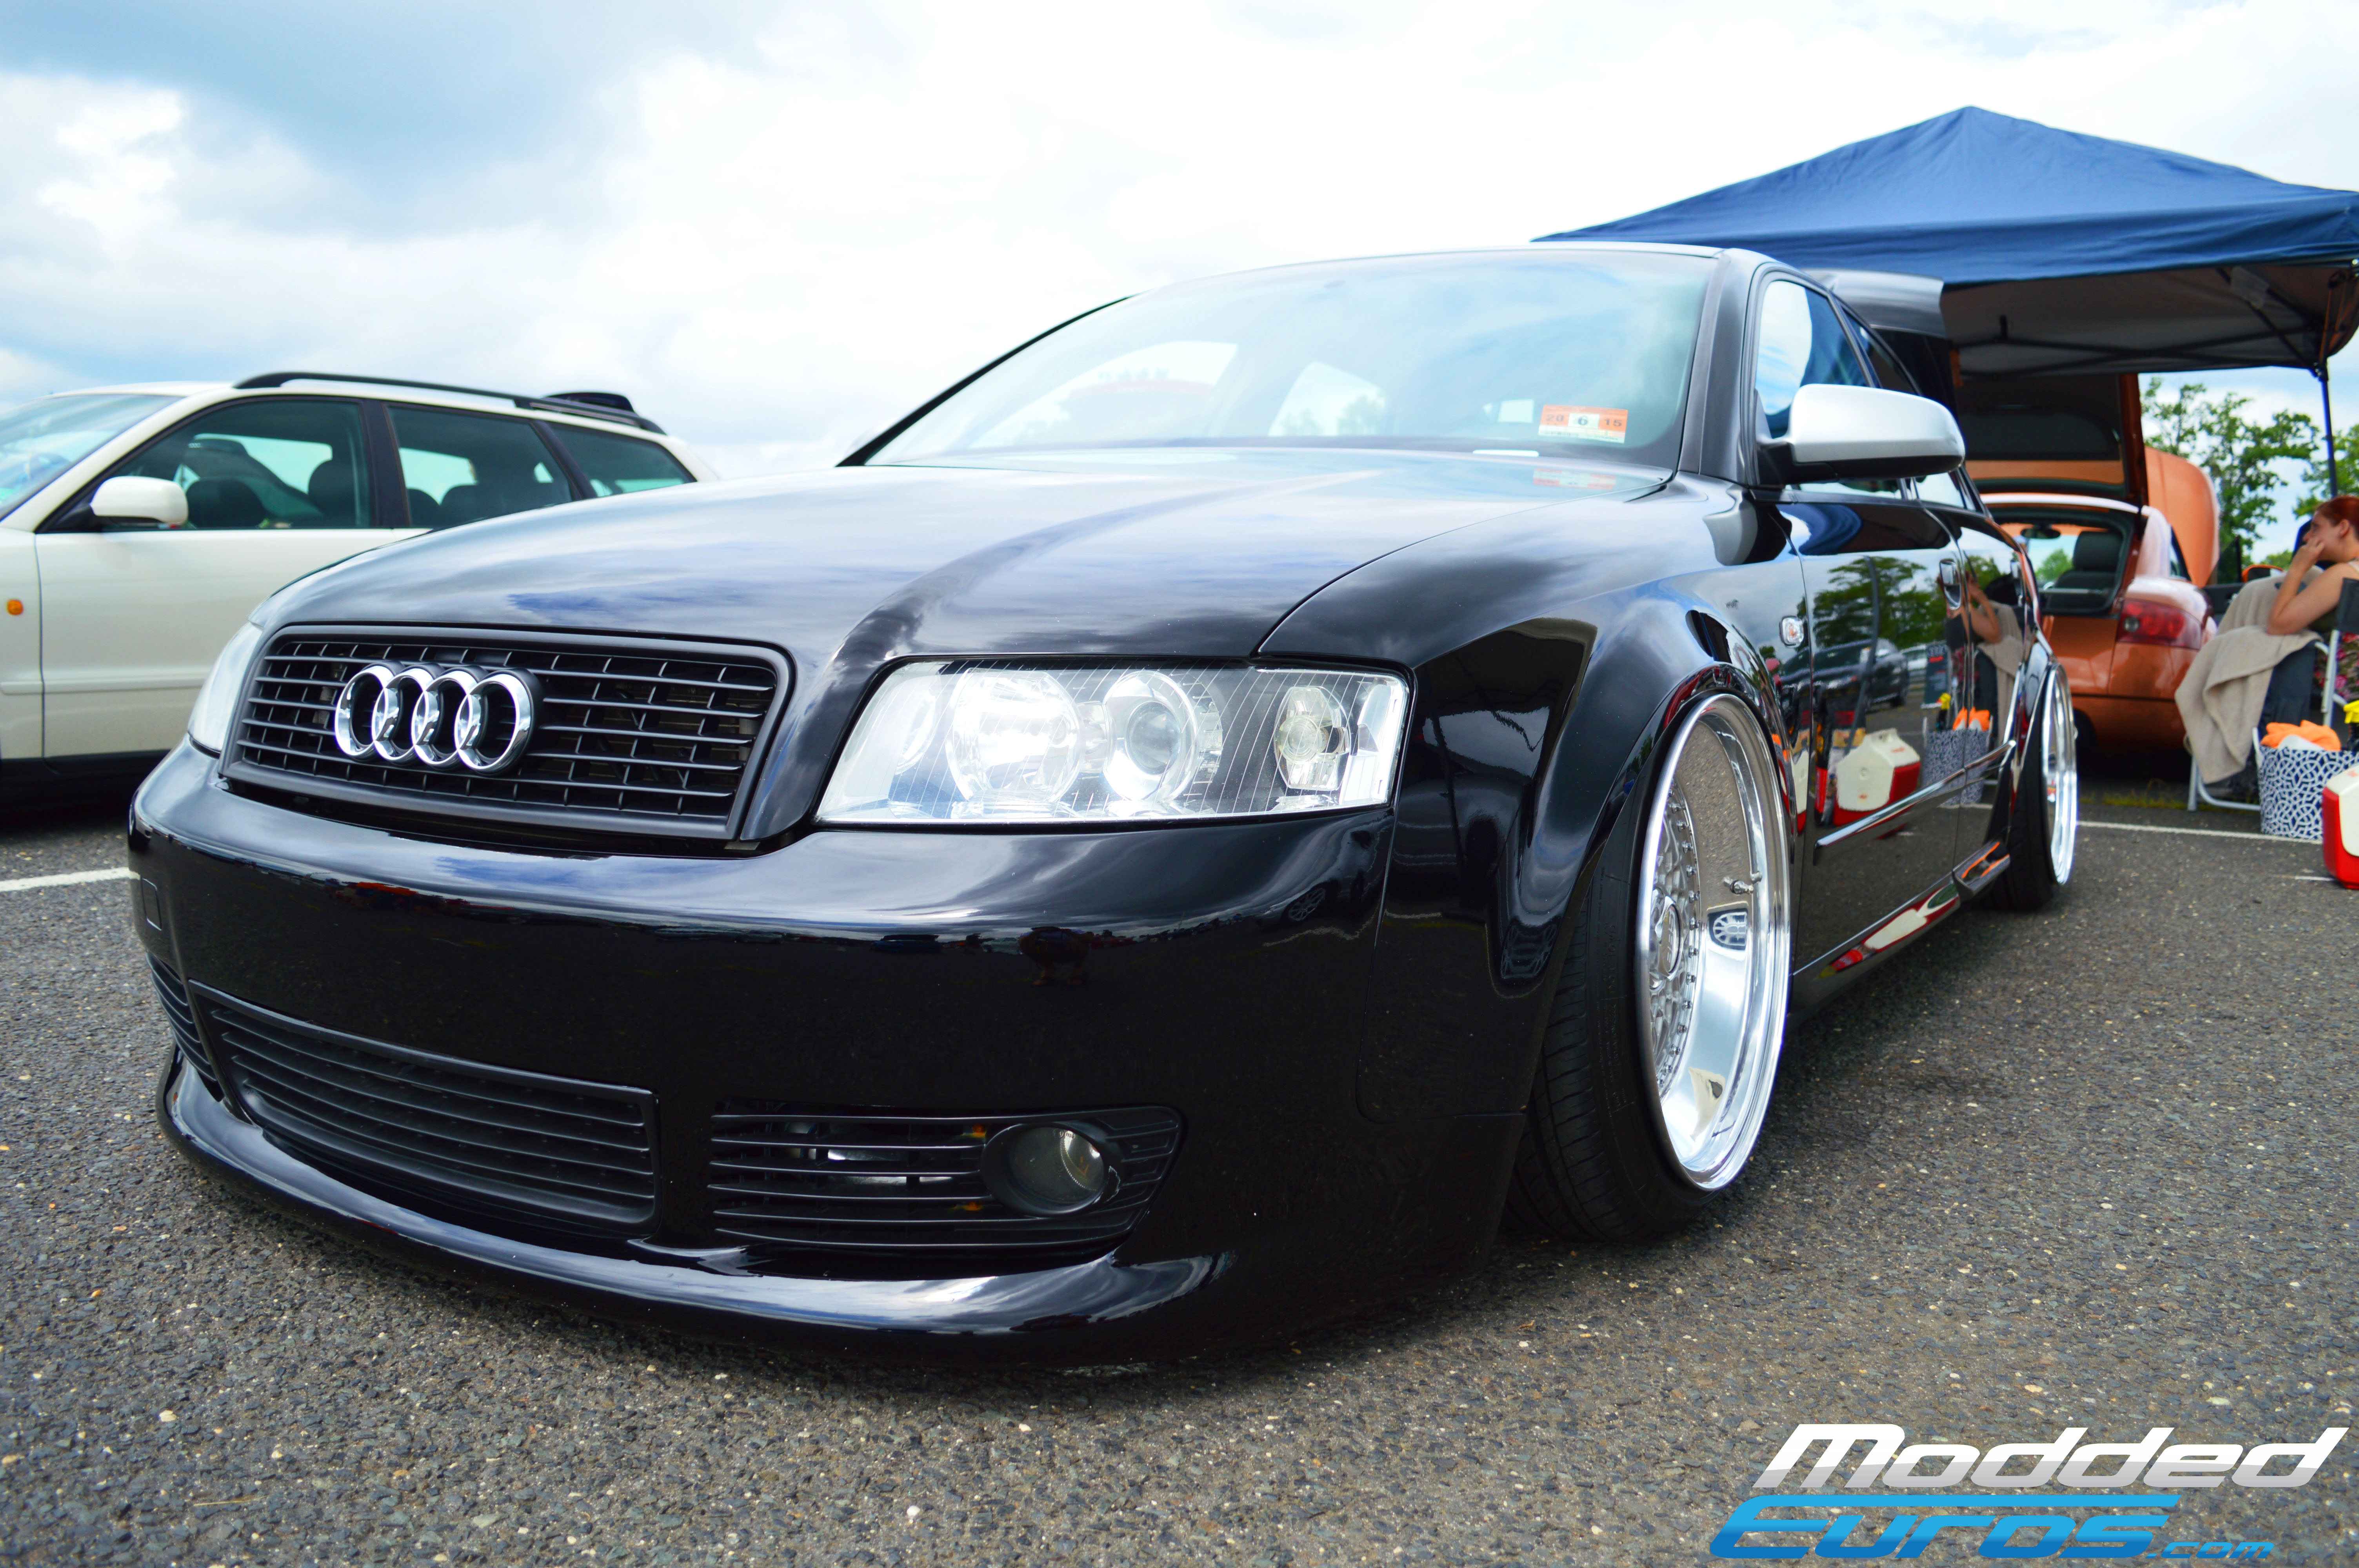 Best B5 A4 mods and performance upgrades